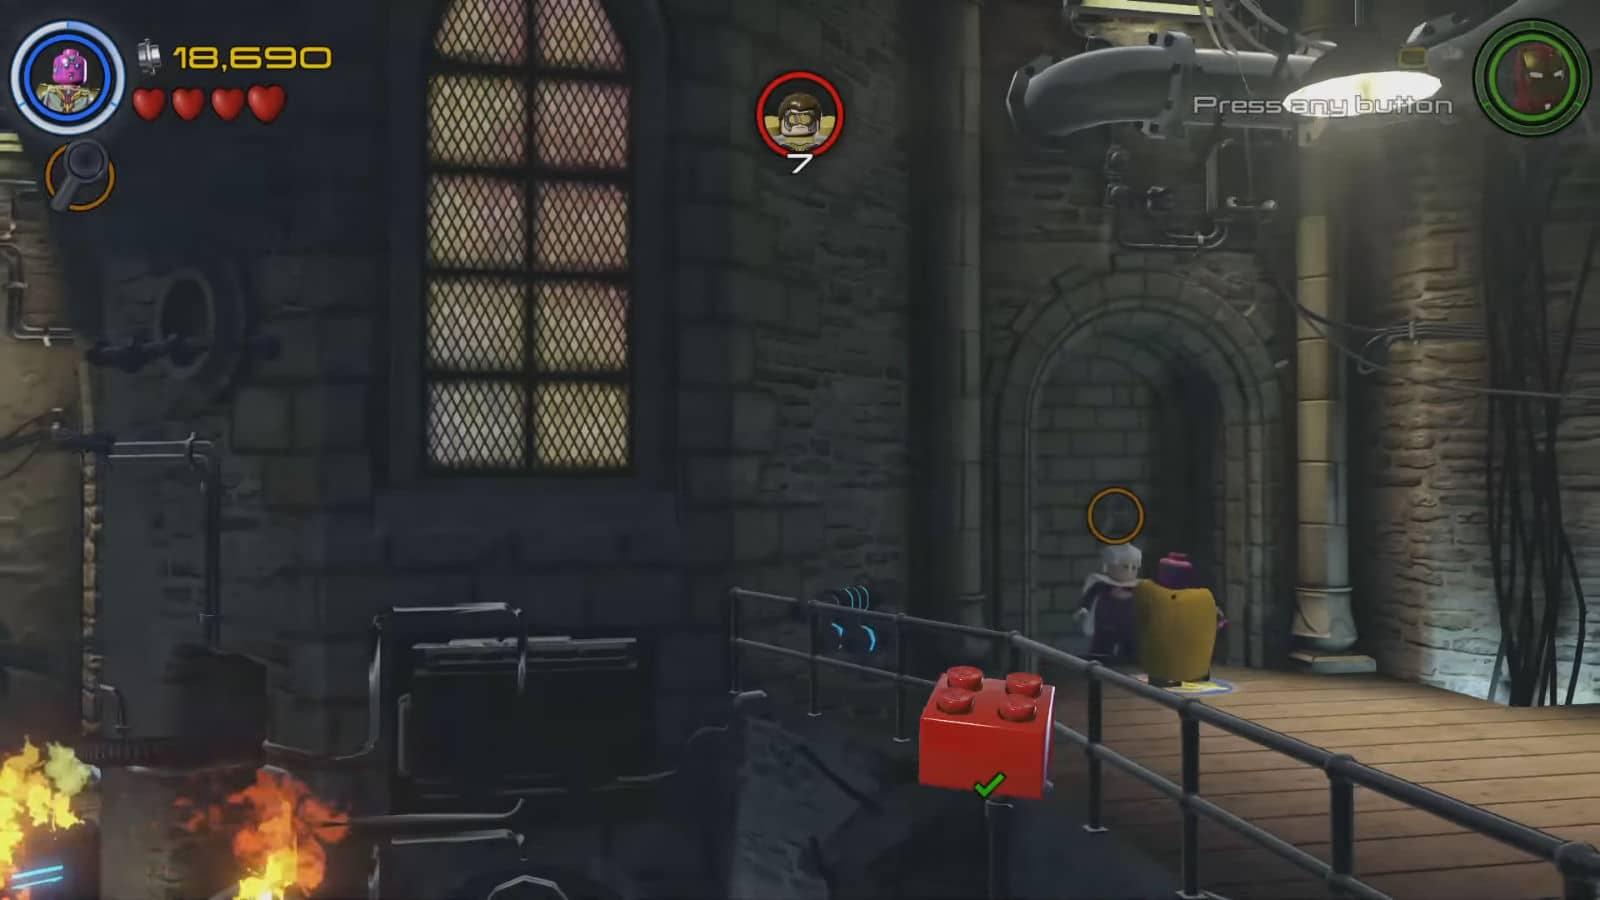 lego avengers pc save game location